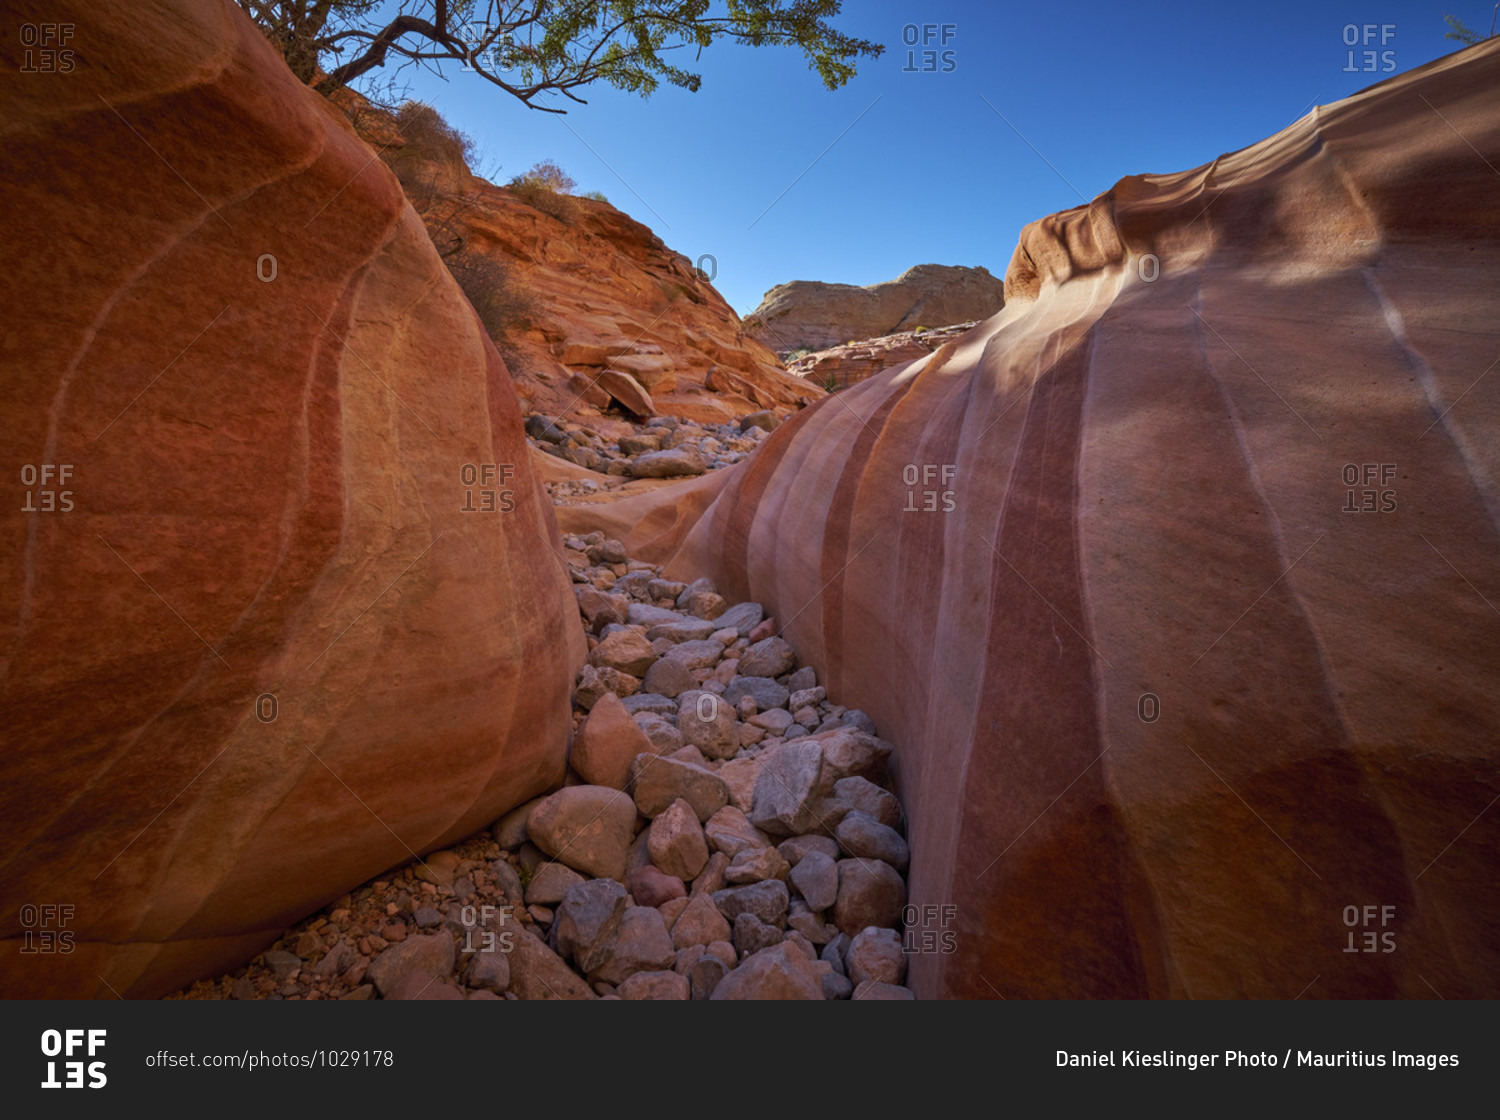 USA, United States of America, Nevada, Valley of Fire, White Domes Trail, National Park, Sierra Nevada, California